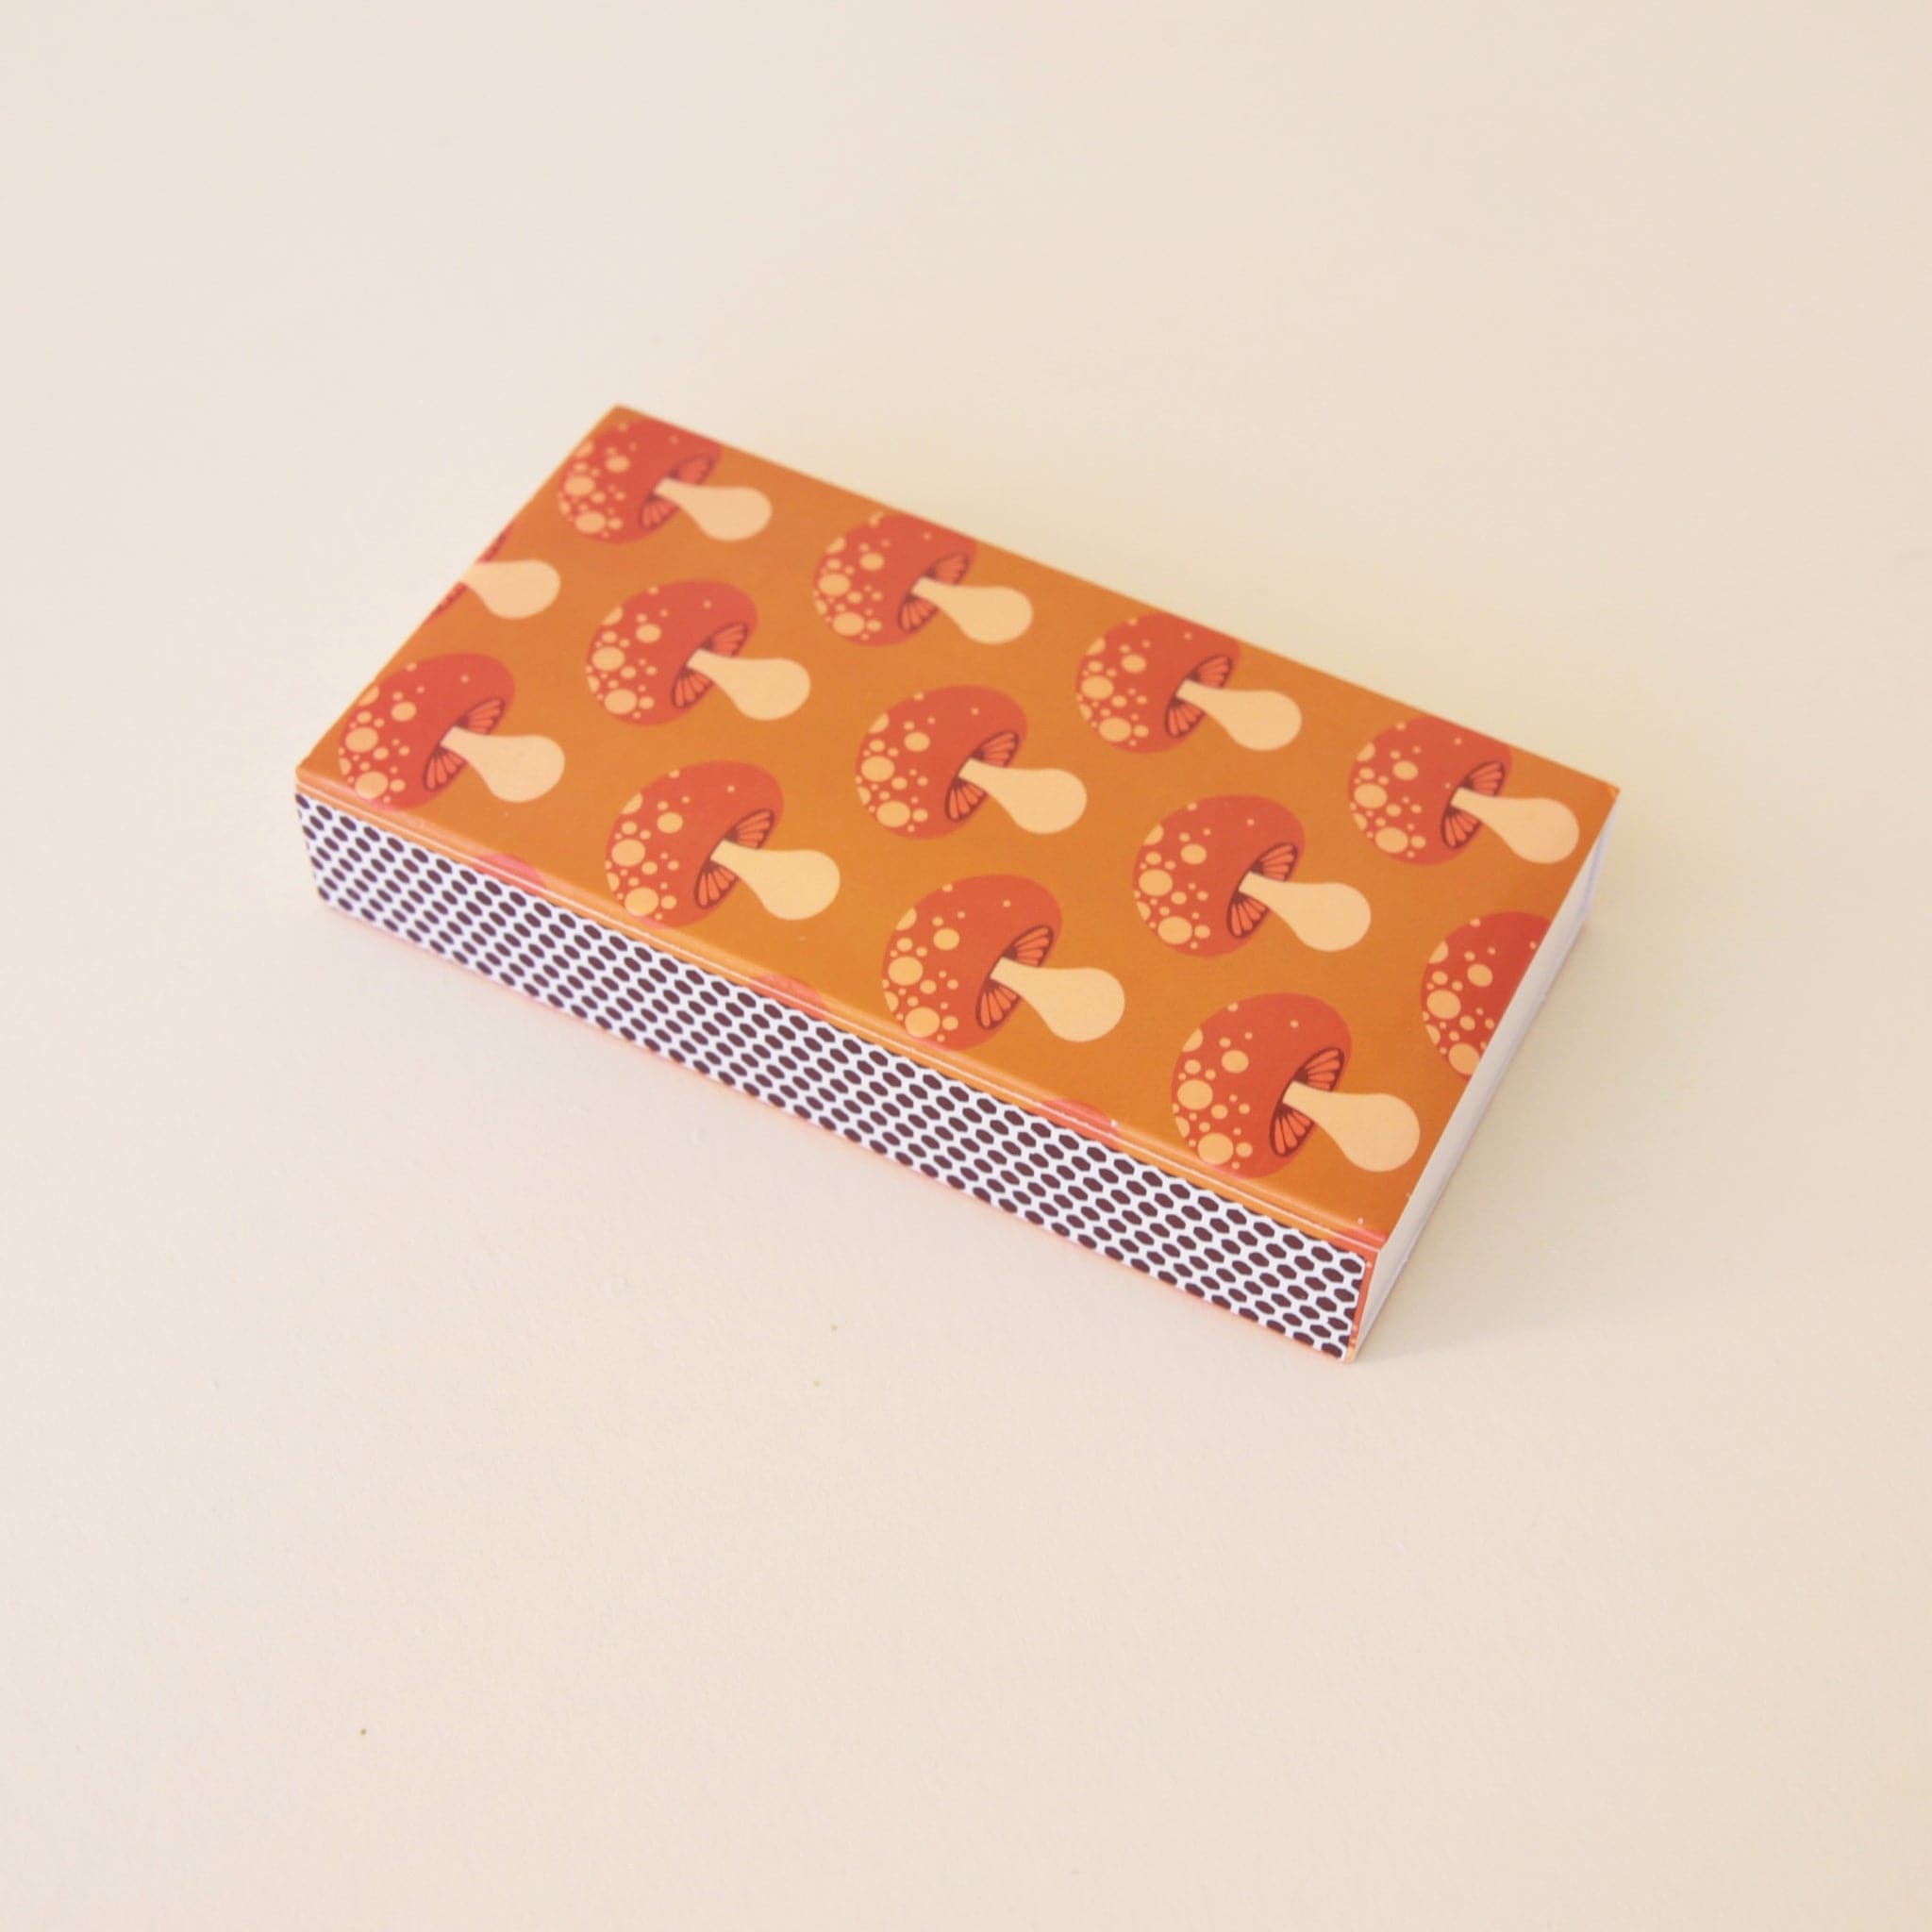 A rectangle box of matches with a repeating red mushroom design along all edges besides the top and bottom.